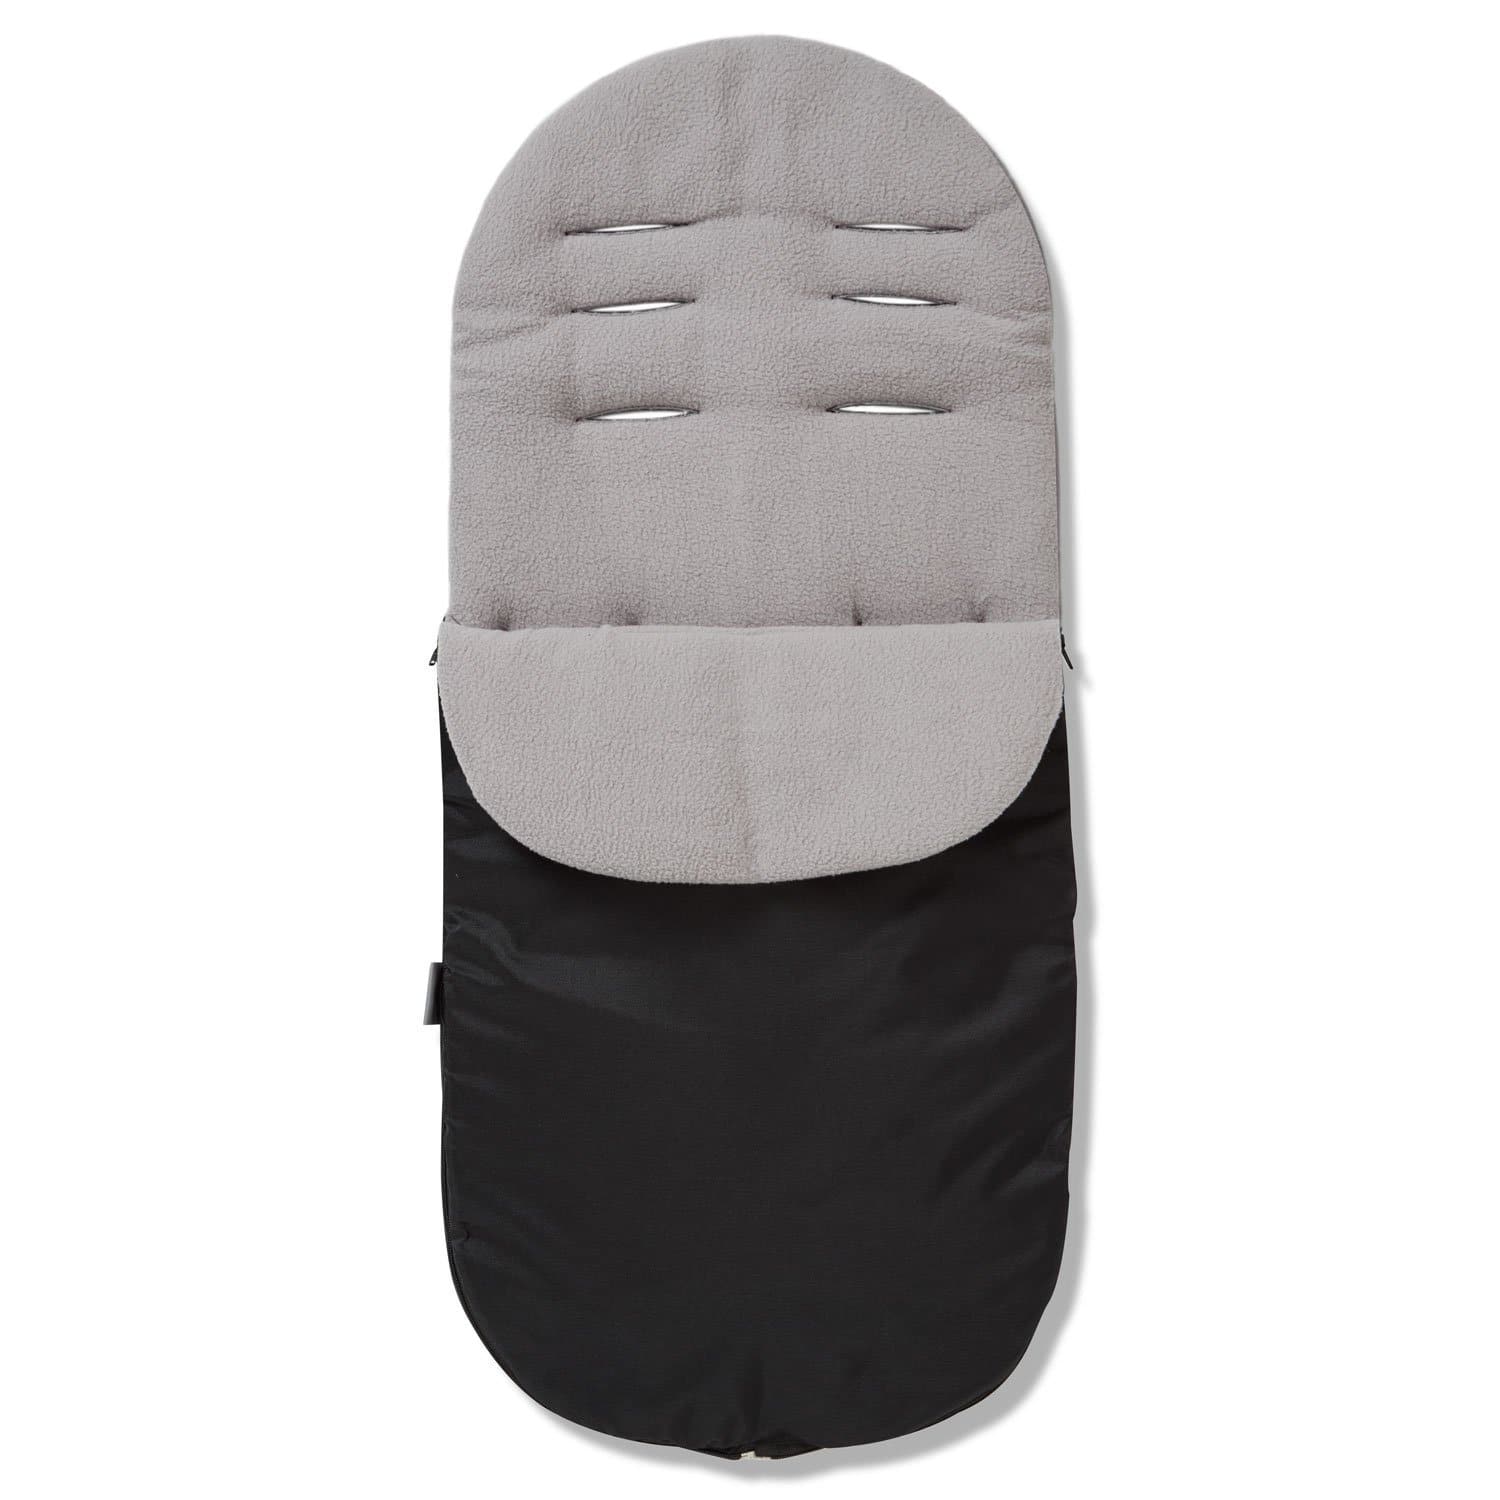 Footmuff / Cosy Toes Compatible with ABC Design - Grey / Fits All Models | For Your Little One